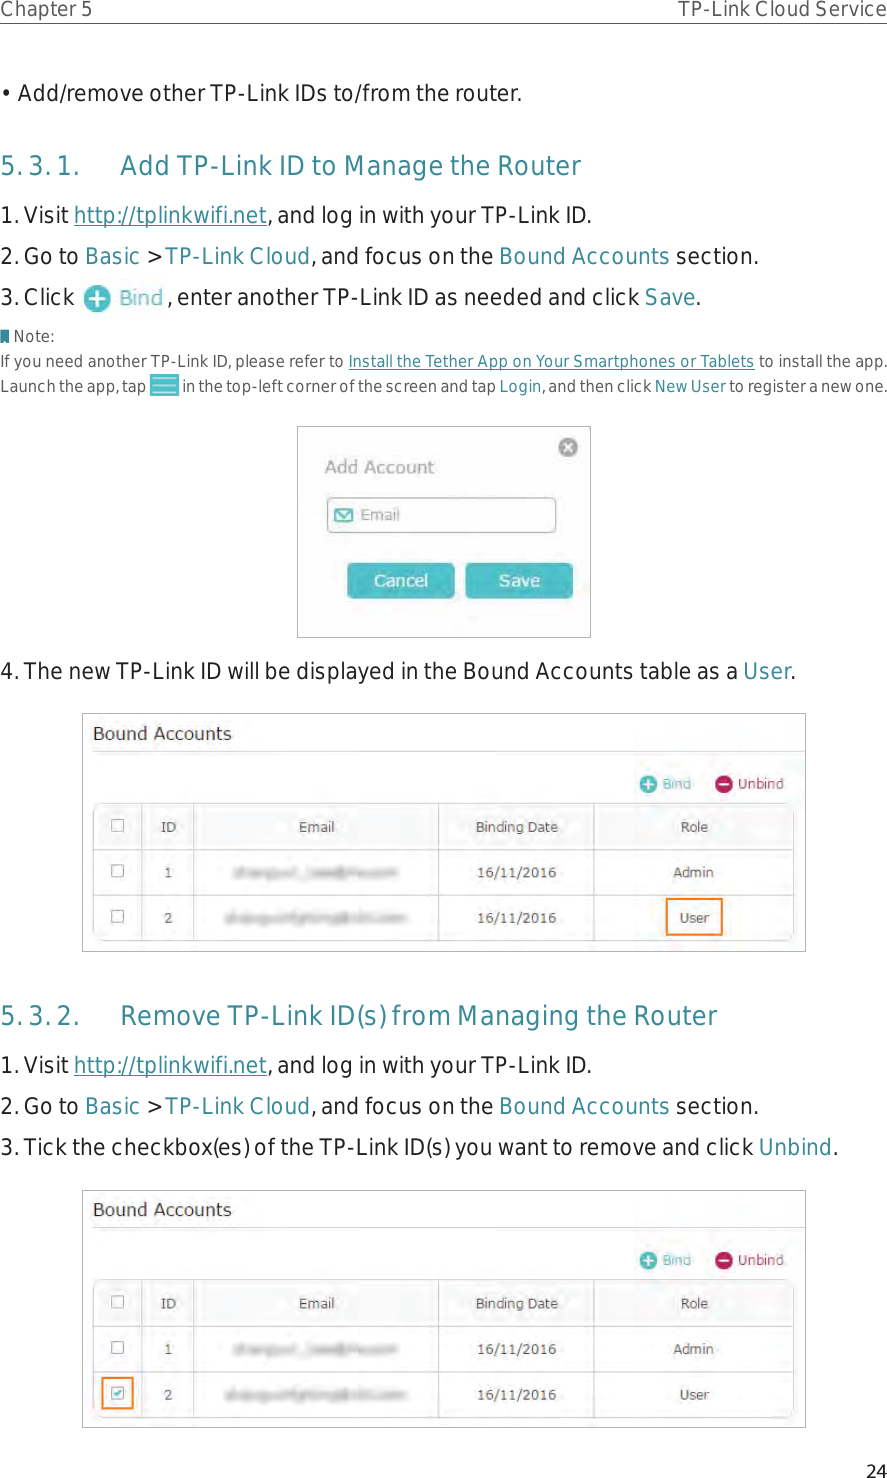 24Chapter 5 TP-Link Cloud Service• Add/remove other TP-Link IDs to/from the router.5. 3. 1.  Add TP-Link ID to Manage the Router1. Visit http://tplinkwifi.net, and log in with your TP-Link ID.2. Go to Basic &gt; TP-Link Cloud, and focus on the Bound Accounts section.3. Click  , enter another TP-Link ID as needed and click Save.Note:If you need another TP-Link ID, please refer to Install the Tether App on Your Smartphones or Tablets to install the app. Launch the app, tap   in the top-left corner of the screen and tap Login, and then click New User to register a new one.4. The new TP-Link ID will be displayed in the Bound Accounts table as a User.5. 3. 2.  Remove TP-Link ID(s) from Managing the Router1. Visit http://tplinkwifi.net, and log in with your TP-Link ID.2. Go to Basic &gt; TP-Link Cloud, and focus on the Bound Accounts section.3. Tick the checkbox(es) of the TP-Link ID(s) you want to remove and click Unbind. 